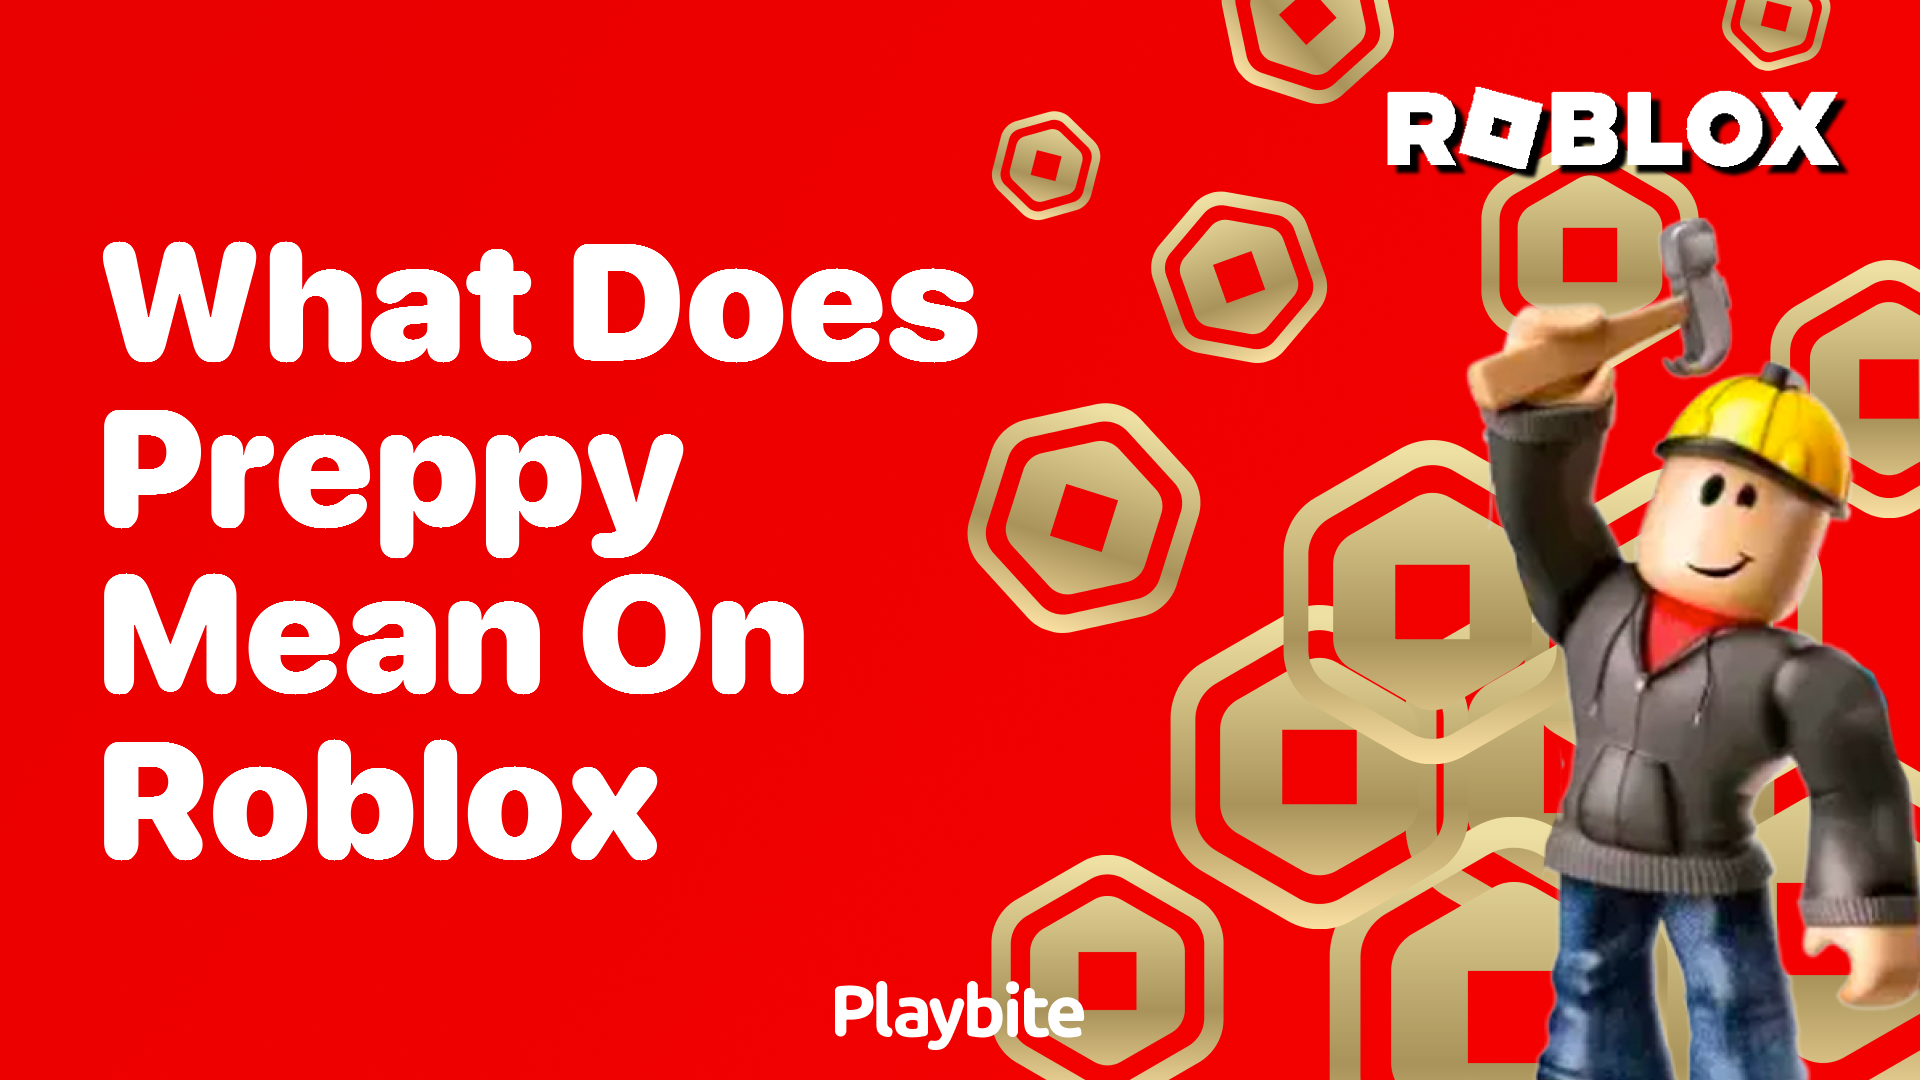 What Does 'Preppy' Mean on Roblox? - Playbite